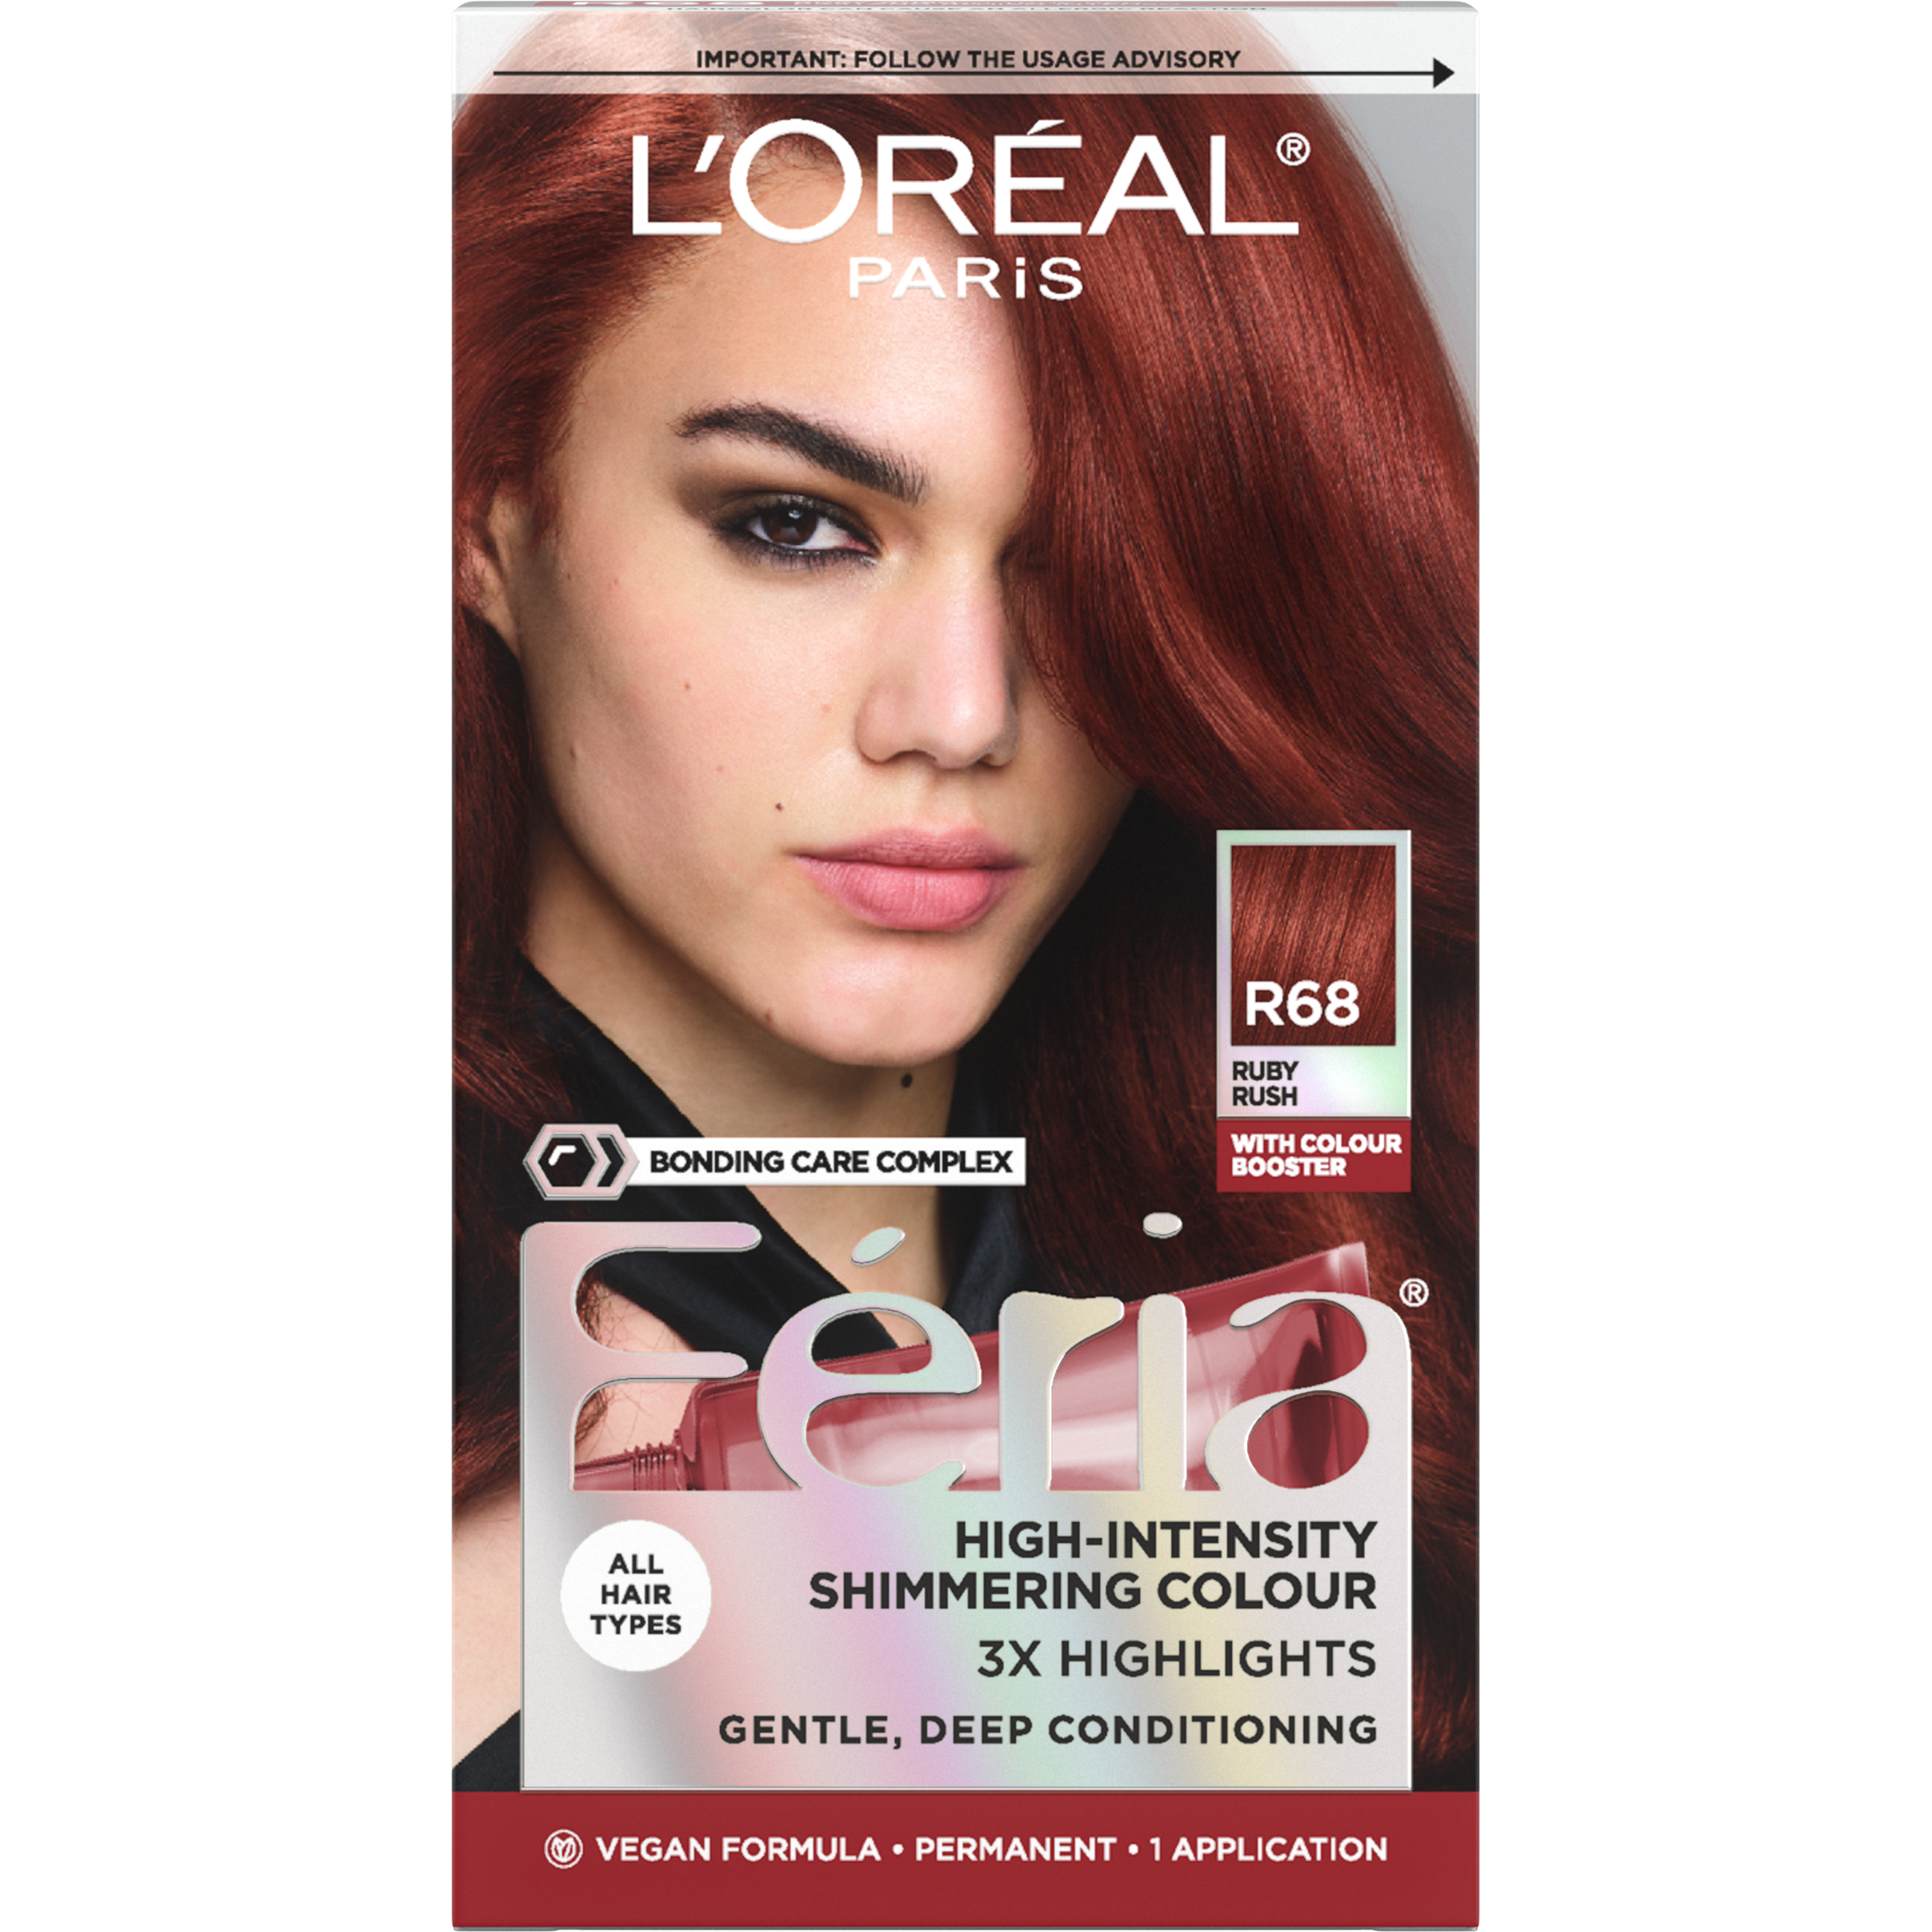 L'Oreal Paris Feria Multi-Faceted Shimmering Permanent Hair Color Kit, R68 Ruby Rush - image 1 of 9